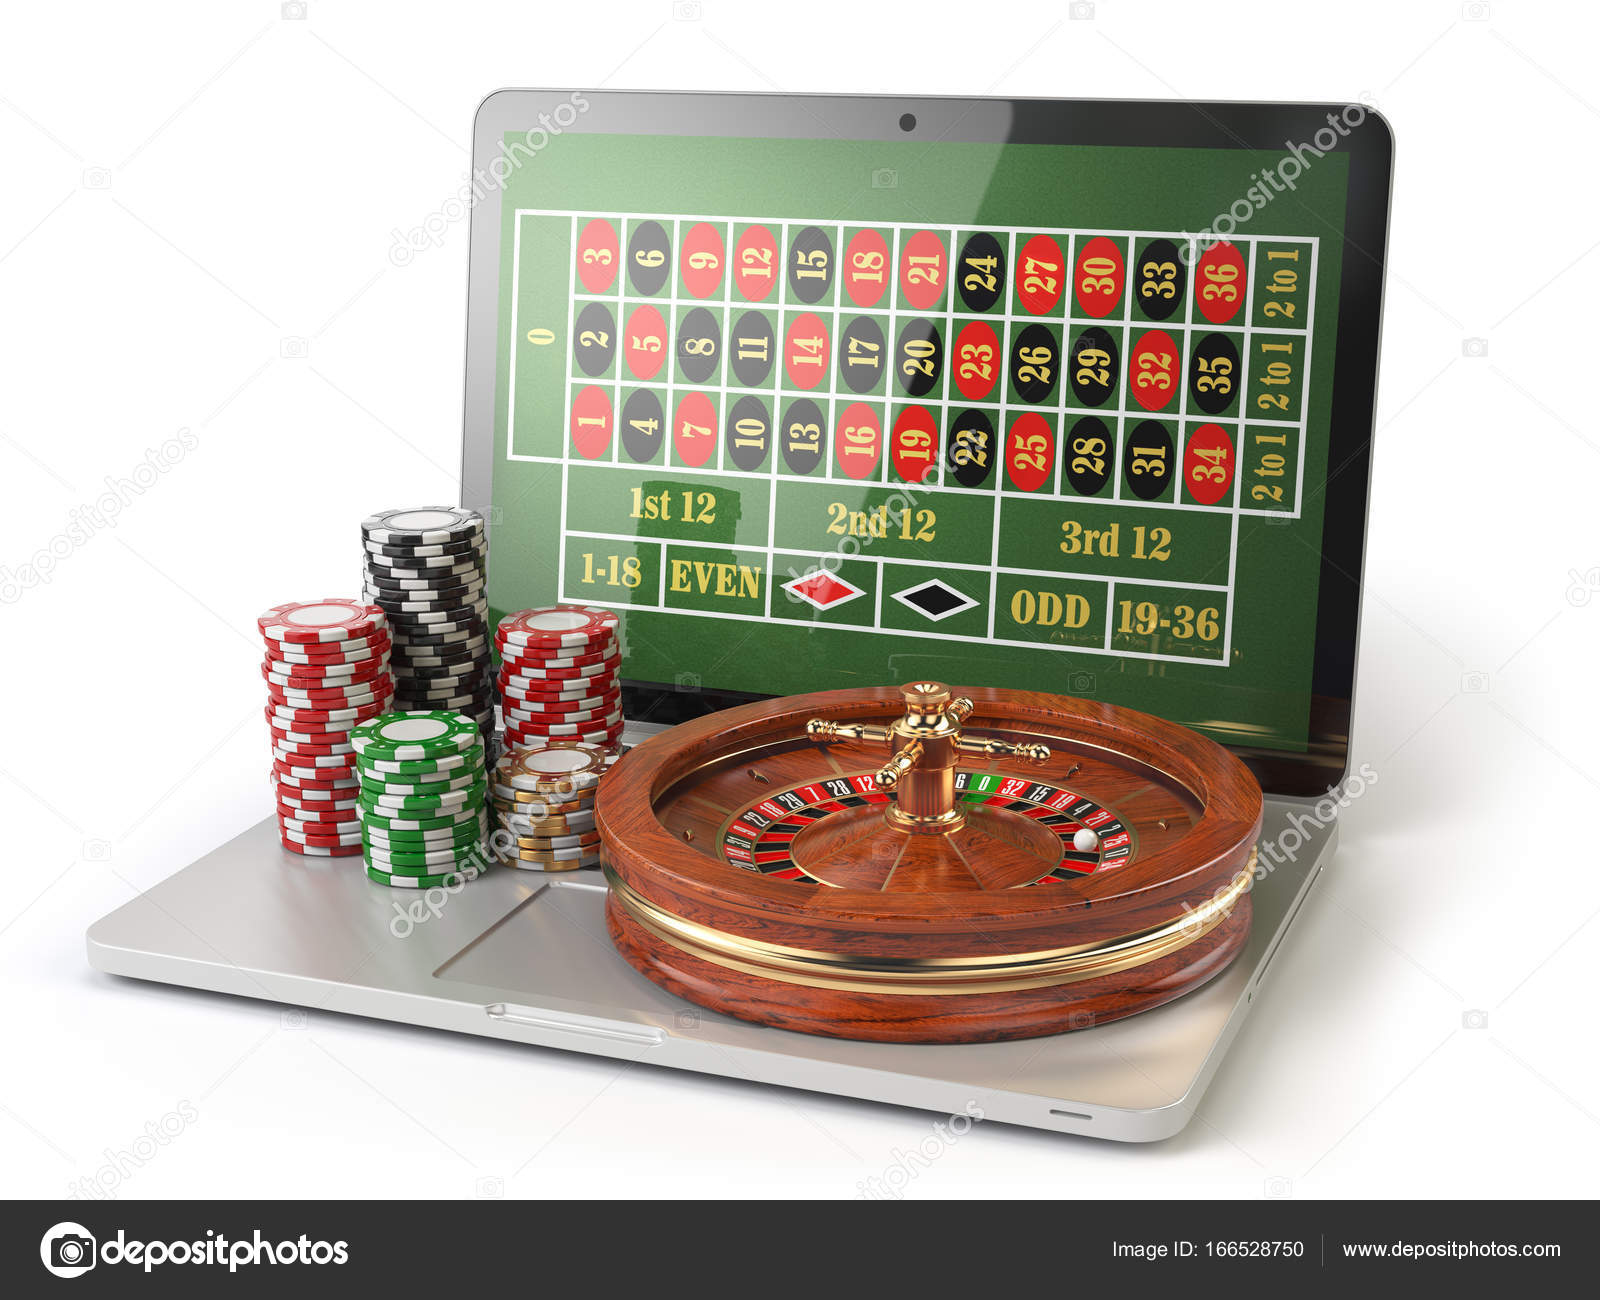 Slots online that pay